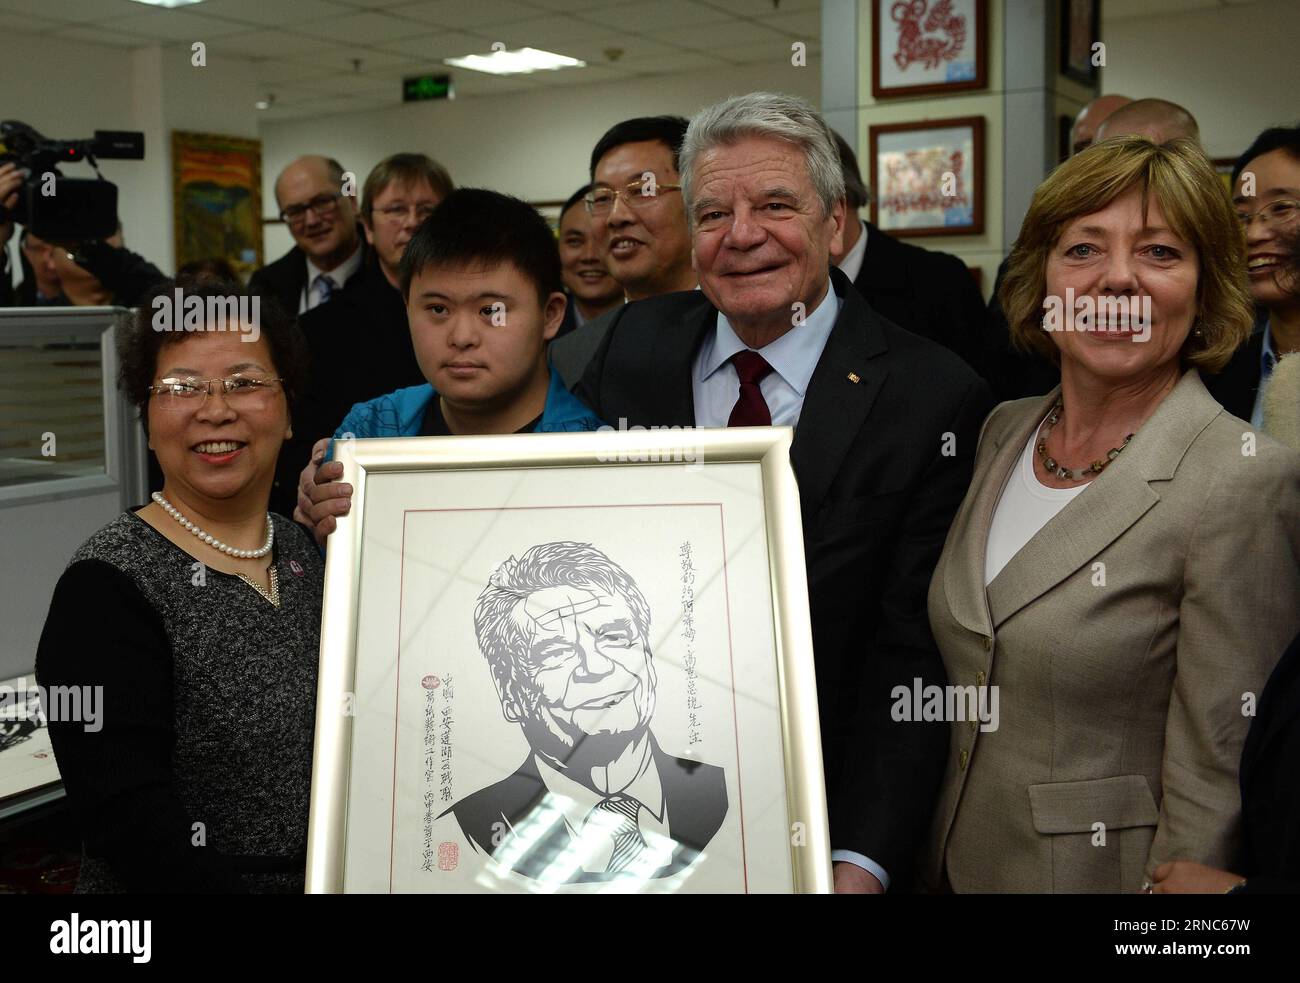 Joachim Gauck besucht Terrakotta-Armee (160324) -- XI AN, March 24, 2016 -- German President Joachim Gauck (C) visits a service center for disabled people and accepts a portrait made by disabled children in Xi an, capital of northwest China s Shaanxi Province, March 24, 2016.) (yxb) CHINA-SHAANXI-GERMAN PRESIDENT-VISIT (CN) LiuxXiao PUBLICATIONxNOTxINxCHN   Joachim Gauck attended Terracotta Army  Xi to March 24 2016 German President Joachim Gauck C visits a Service Center for DISABLED Celebrities and accepts a Portrait Made by DISABLED Children in Xi to Capital of Northwest China S Shaanxi Pro Stock Photo